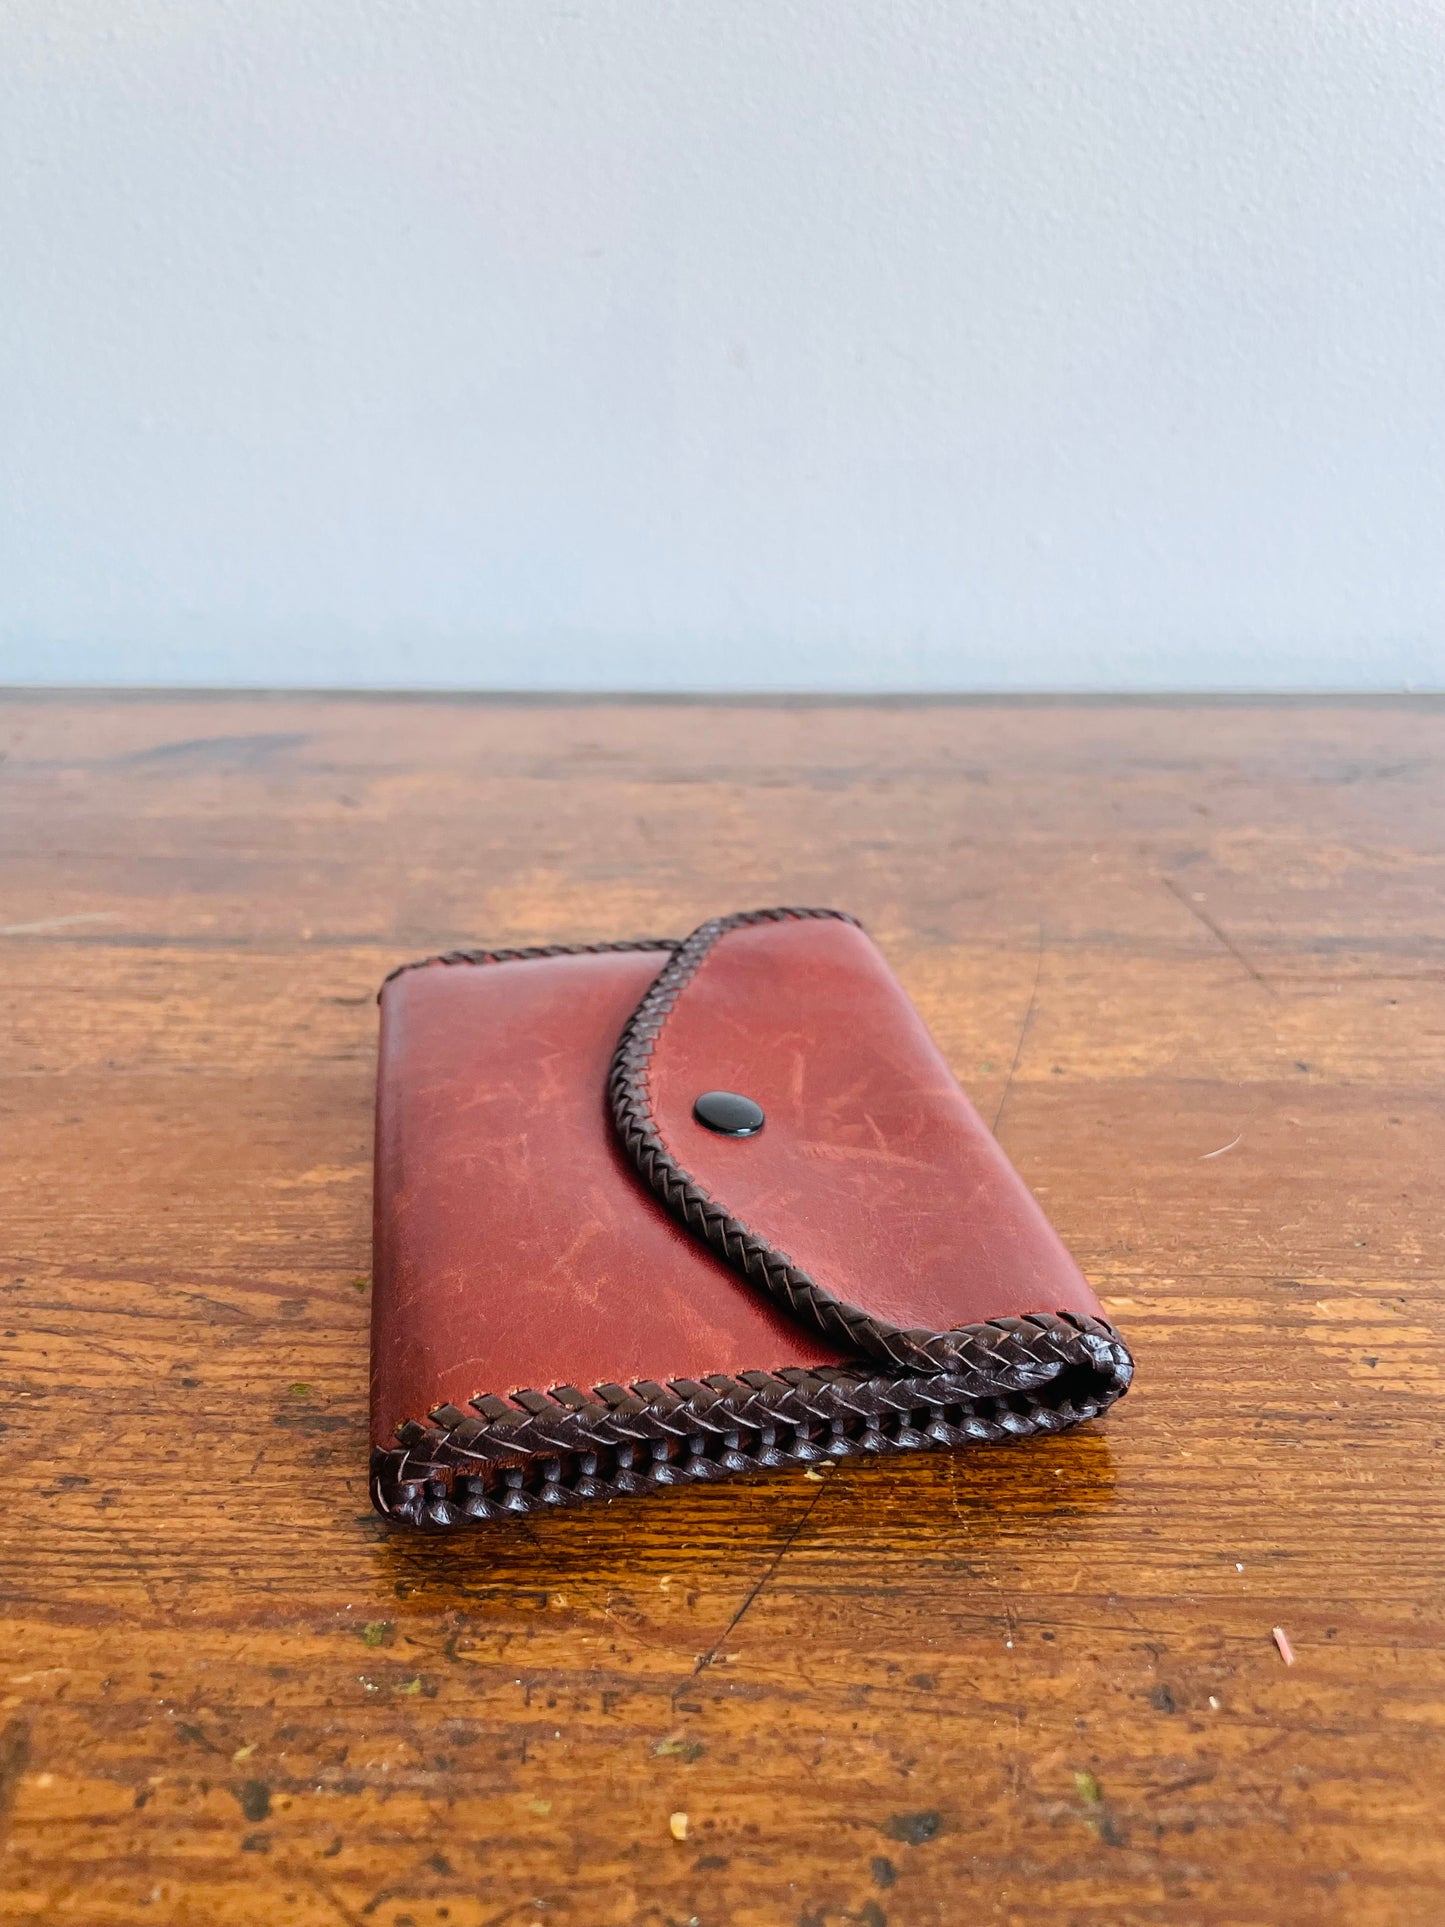 Leather Wallet with Tempered Hooks for Keys Inside - UCF Made in Canada